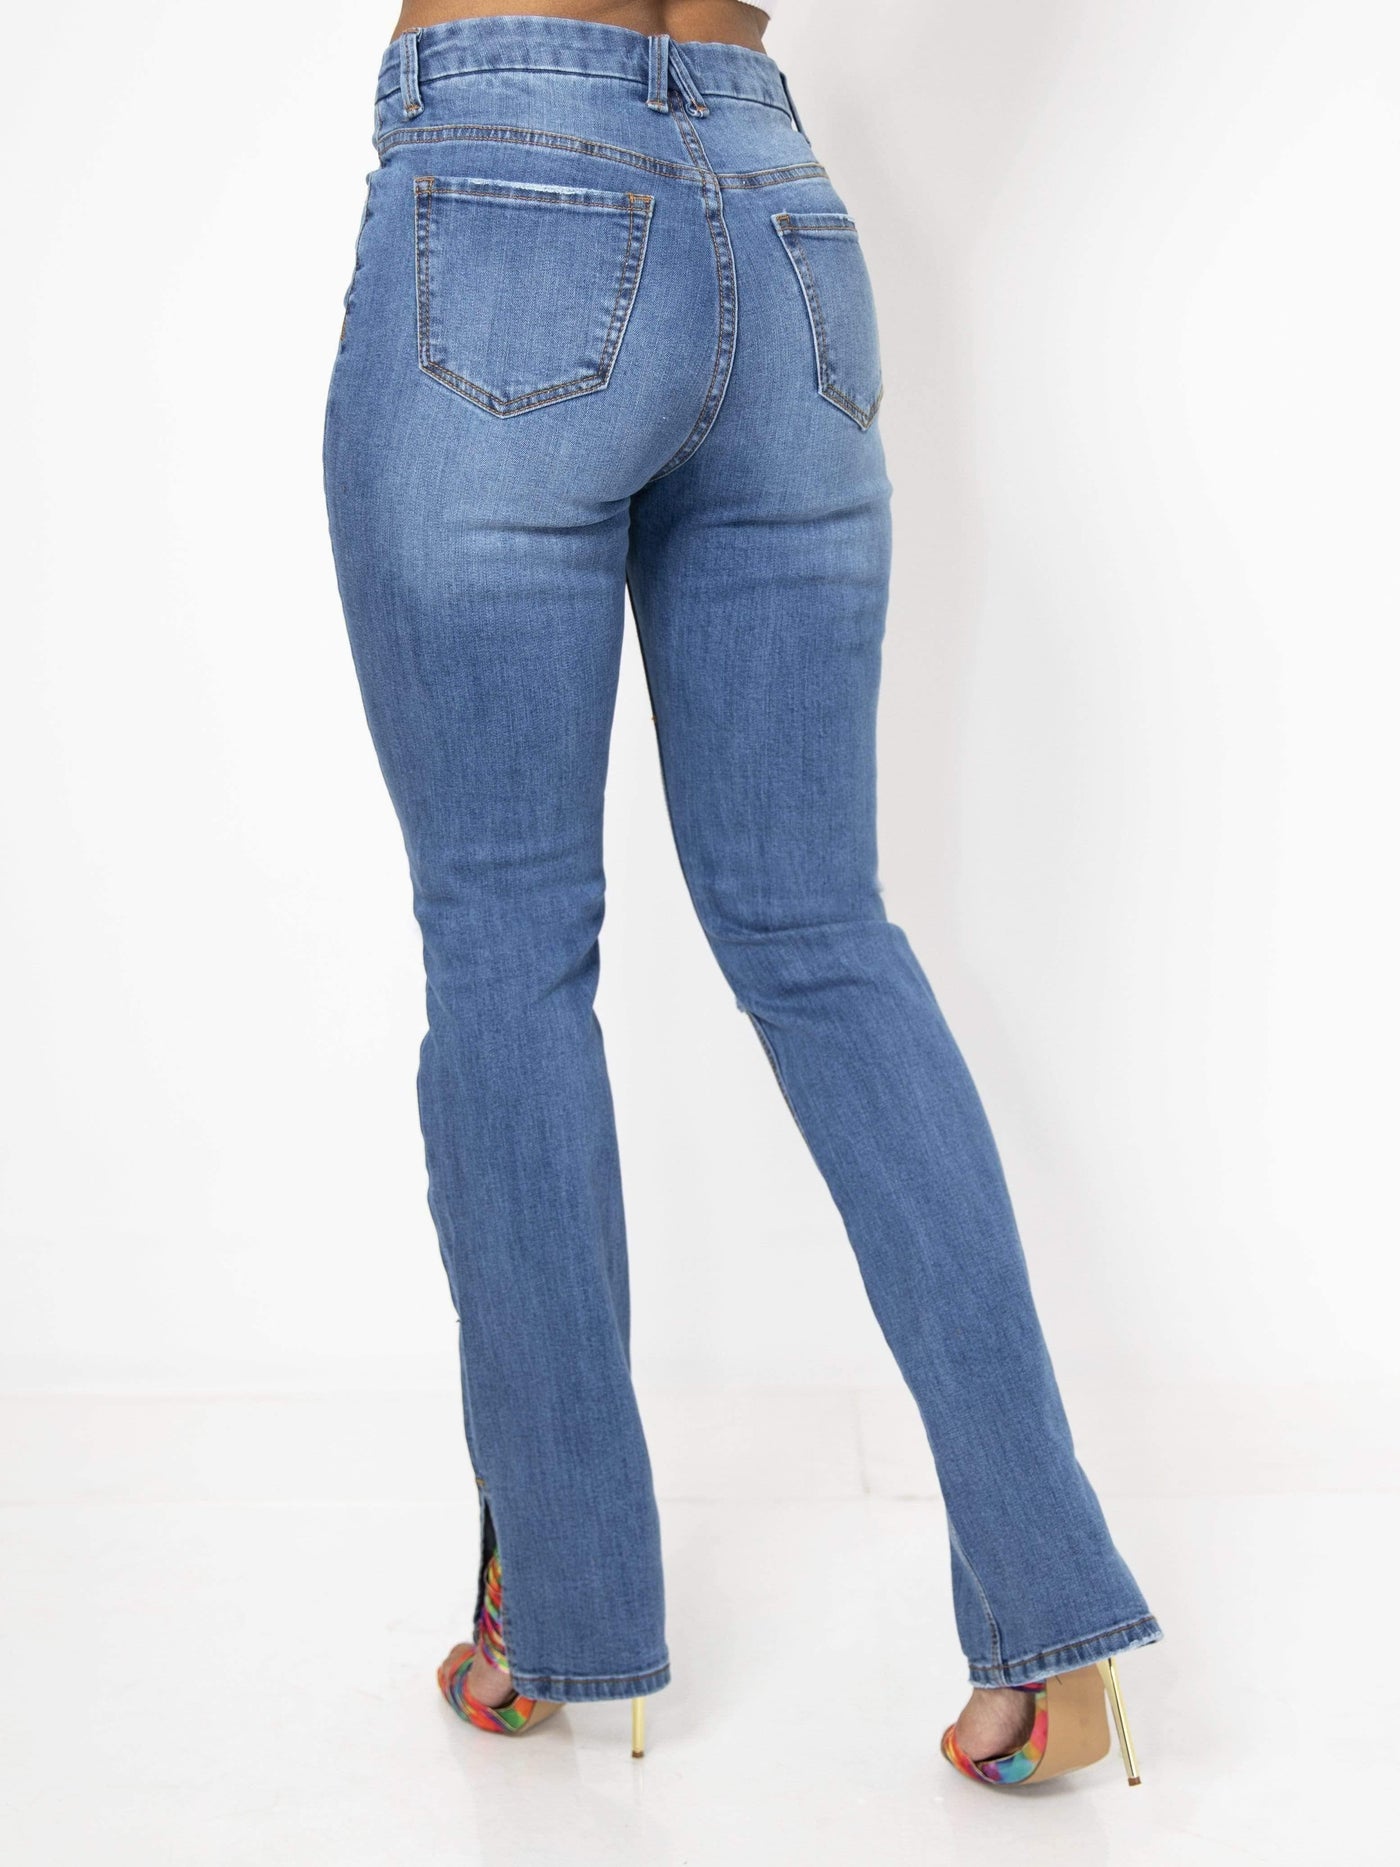 Concrete Rose | High Rise Distressed Jeans - Statement Piece NY basic, Blue, Bottom, Bottoms, casual, chic, Denim, Distressed, Fall, jeans, Long Pants, Misses, skinny fit, skinny pants, statement, Statement Clothing, statement piece, statement piece ny Statement Bottoms